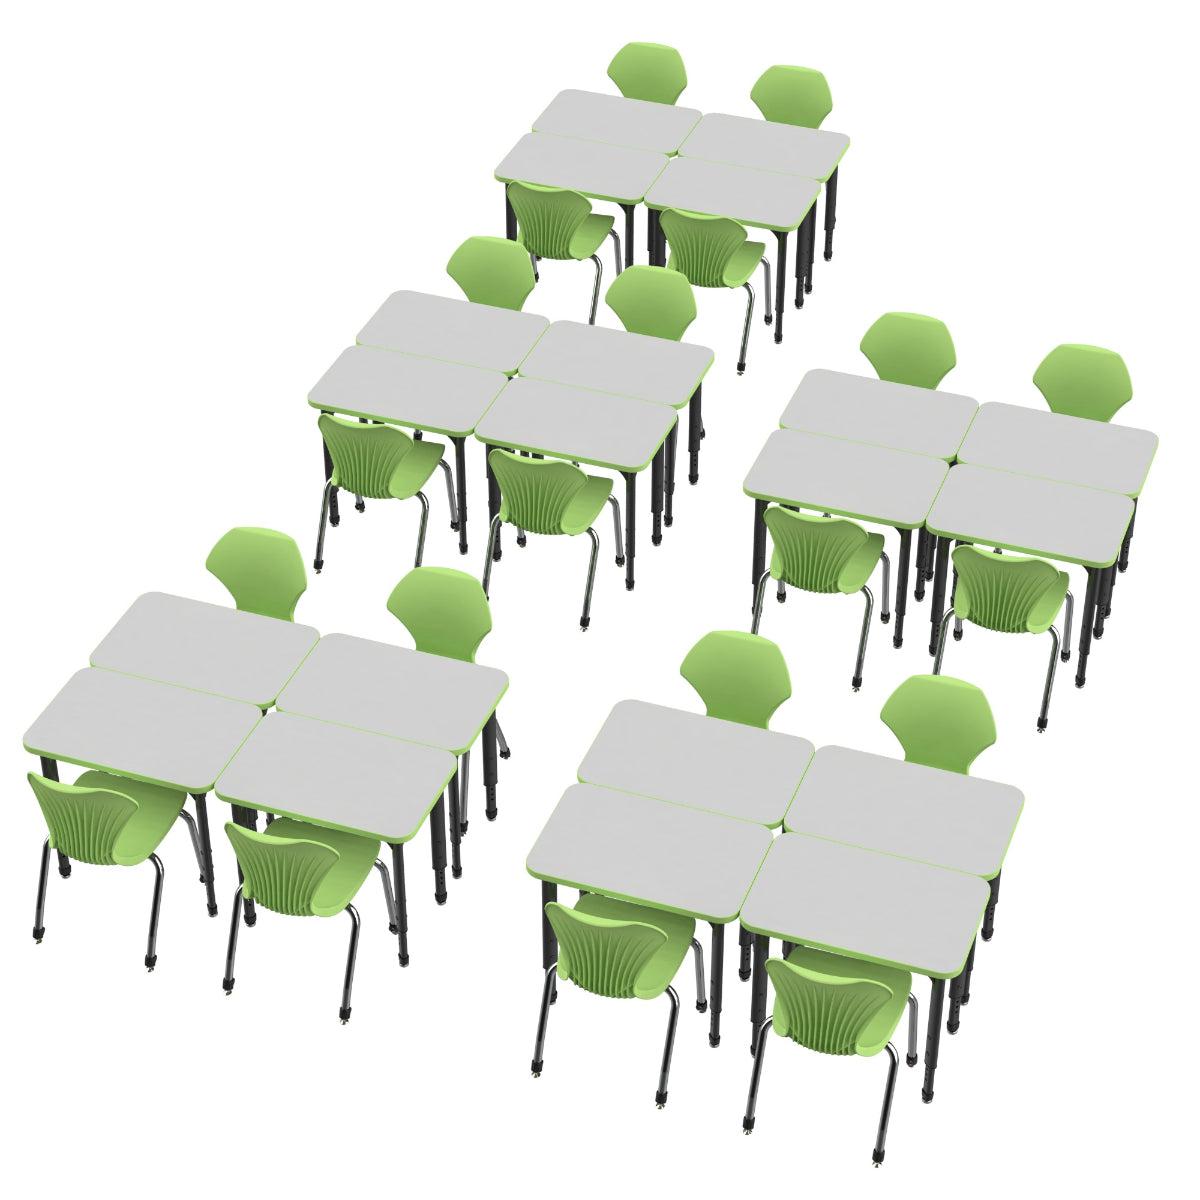 Apex White Dry Erase Classroom Desk and Chair Package, 20 Rectangle Collaborative Student Desks, 24" x 30", with 20 Apex Stack Chairs